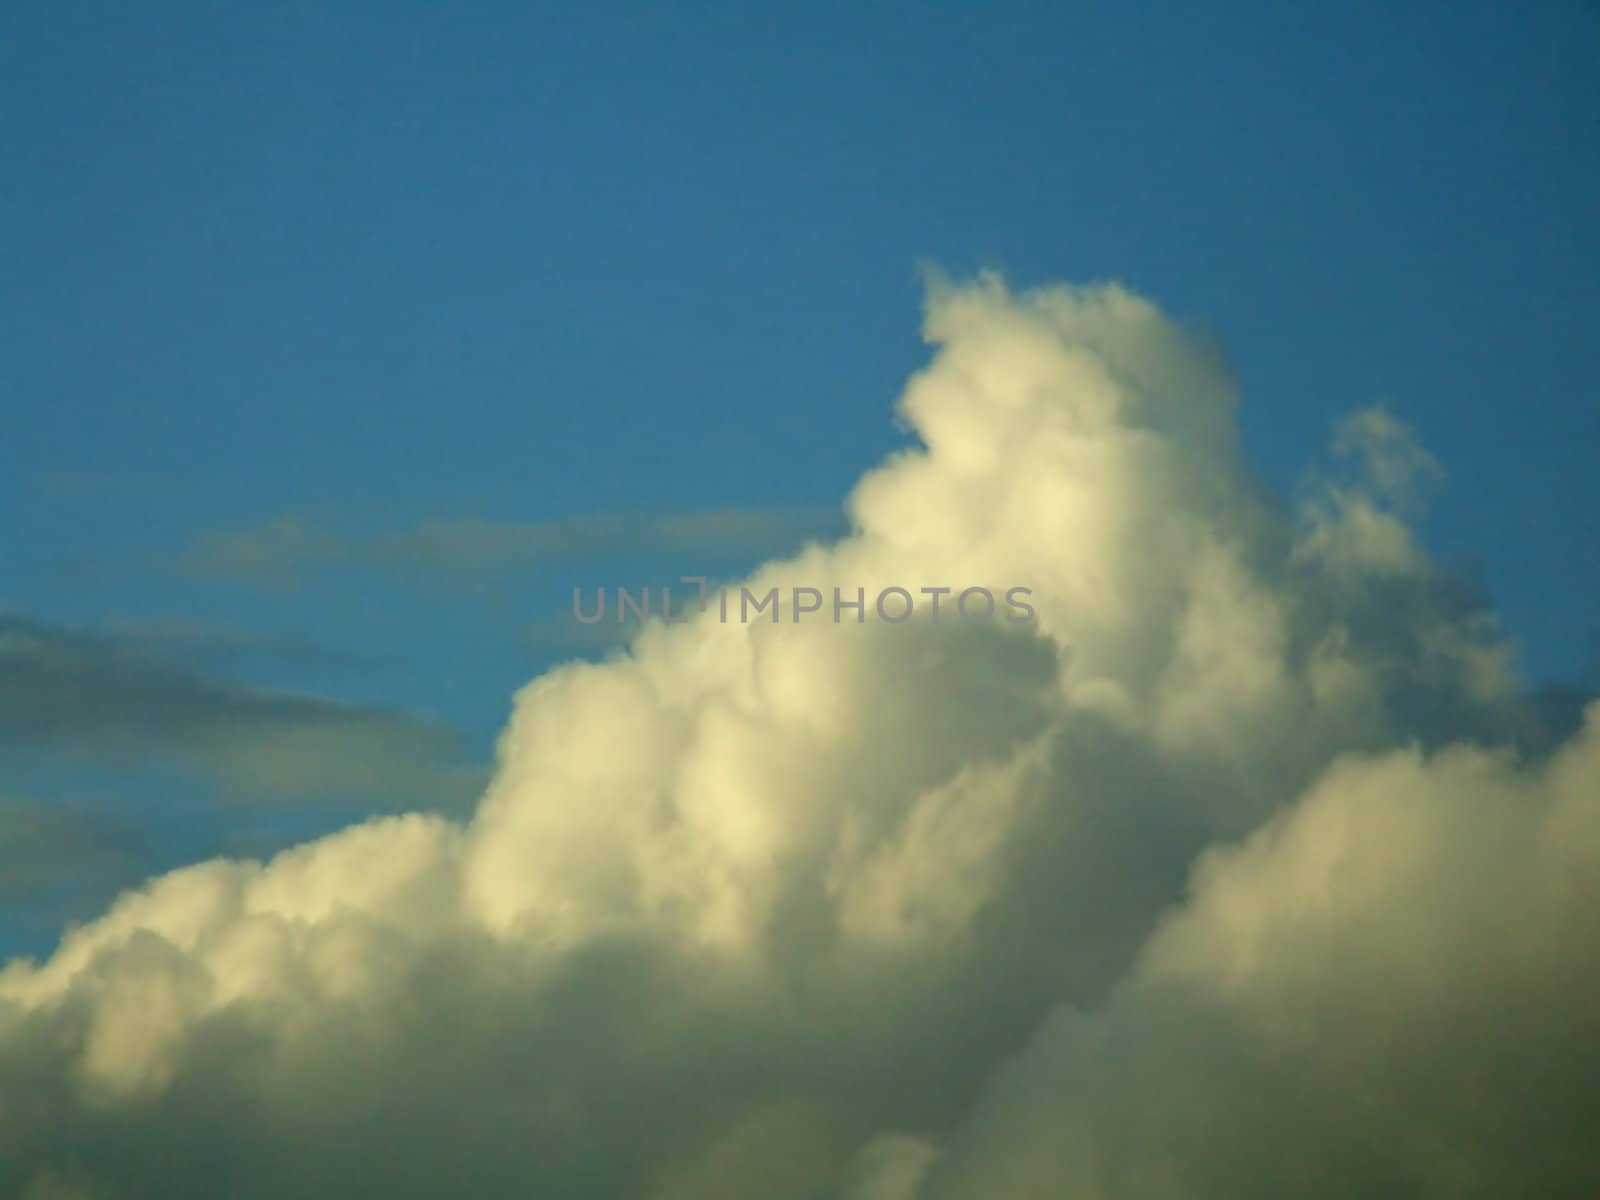 Clouds in evening with sunlight, shadows and blue sky